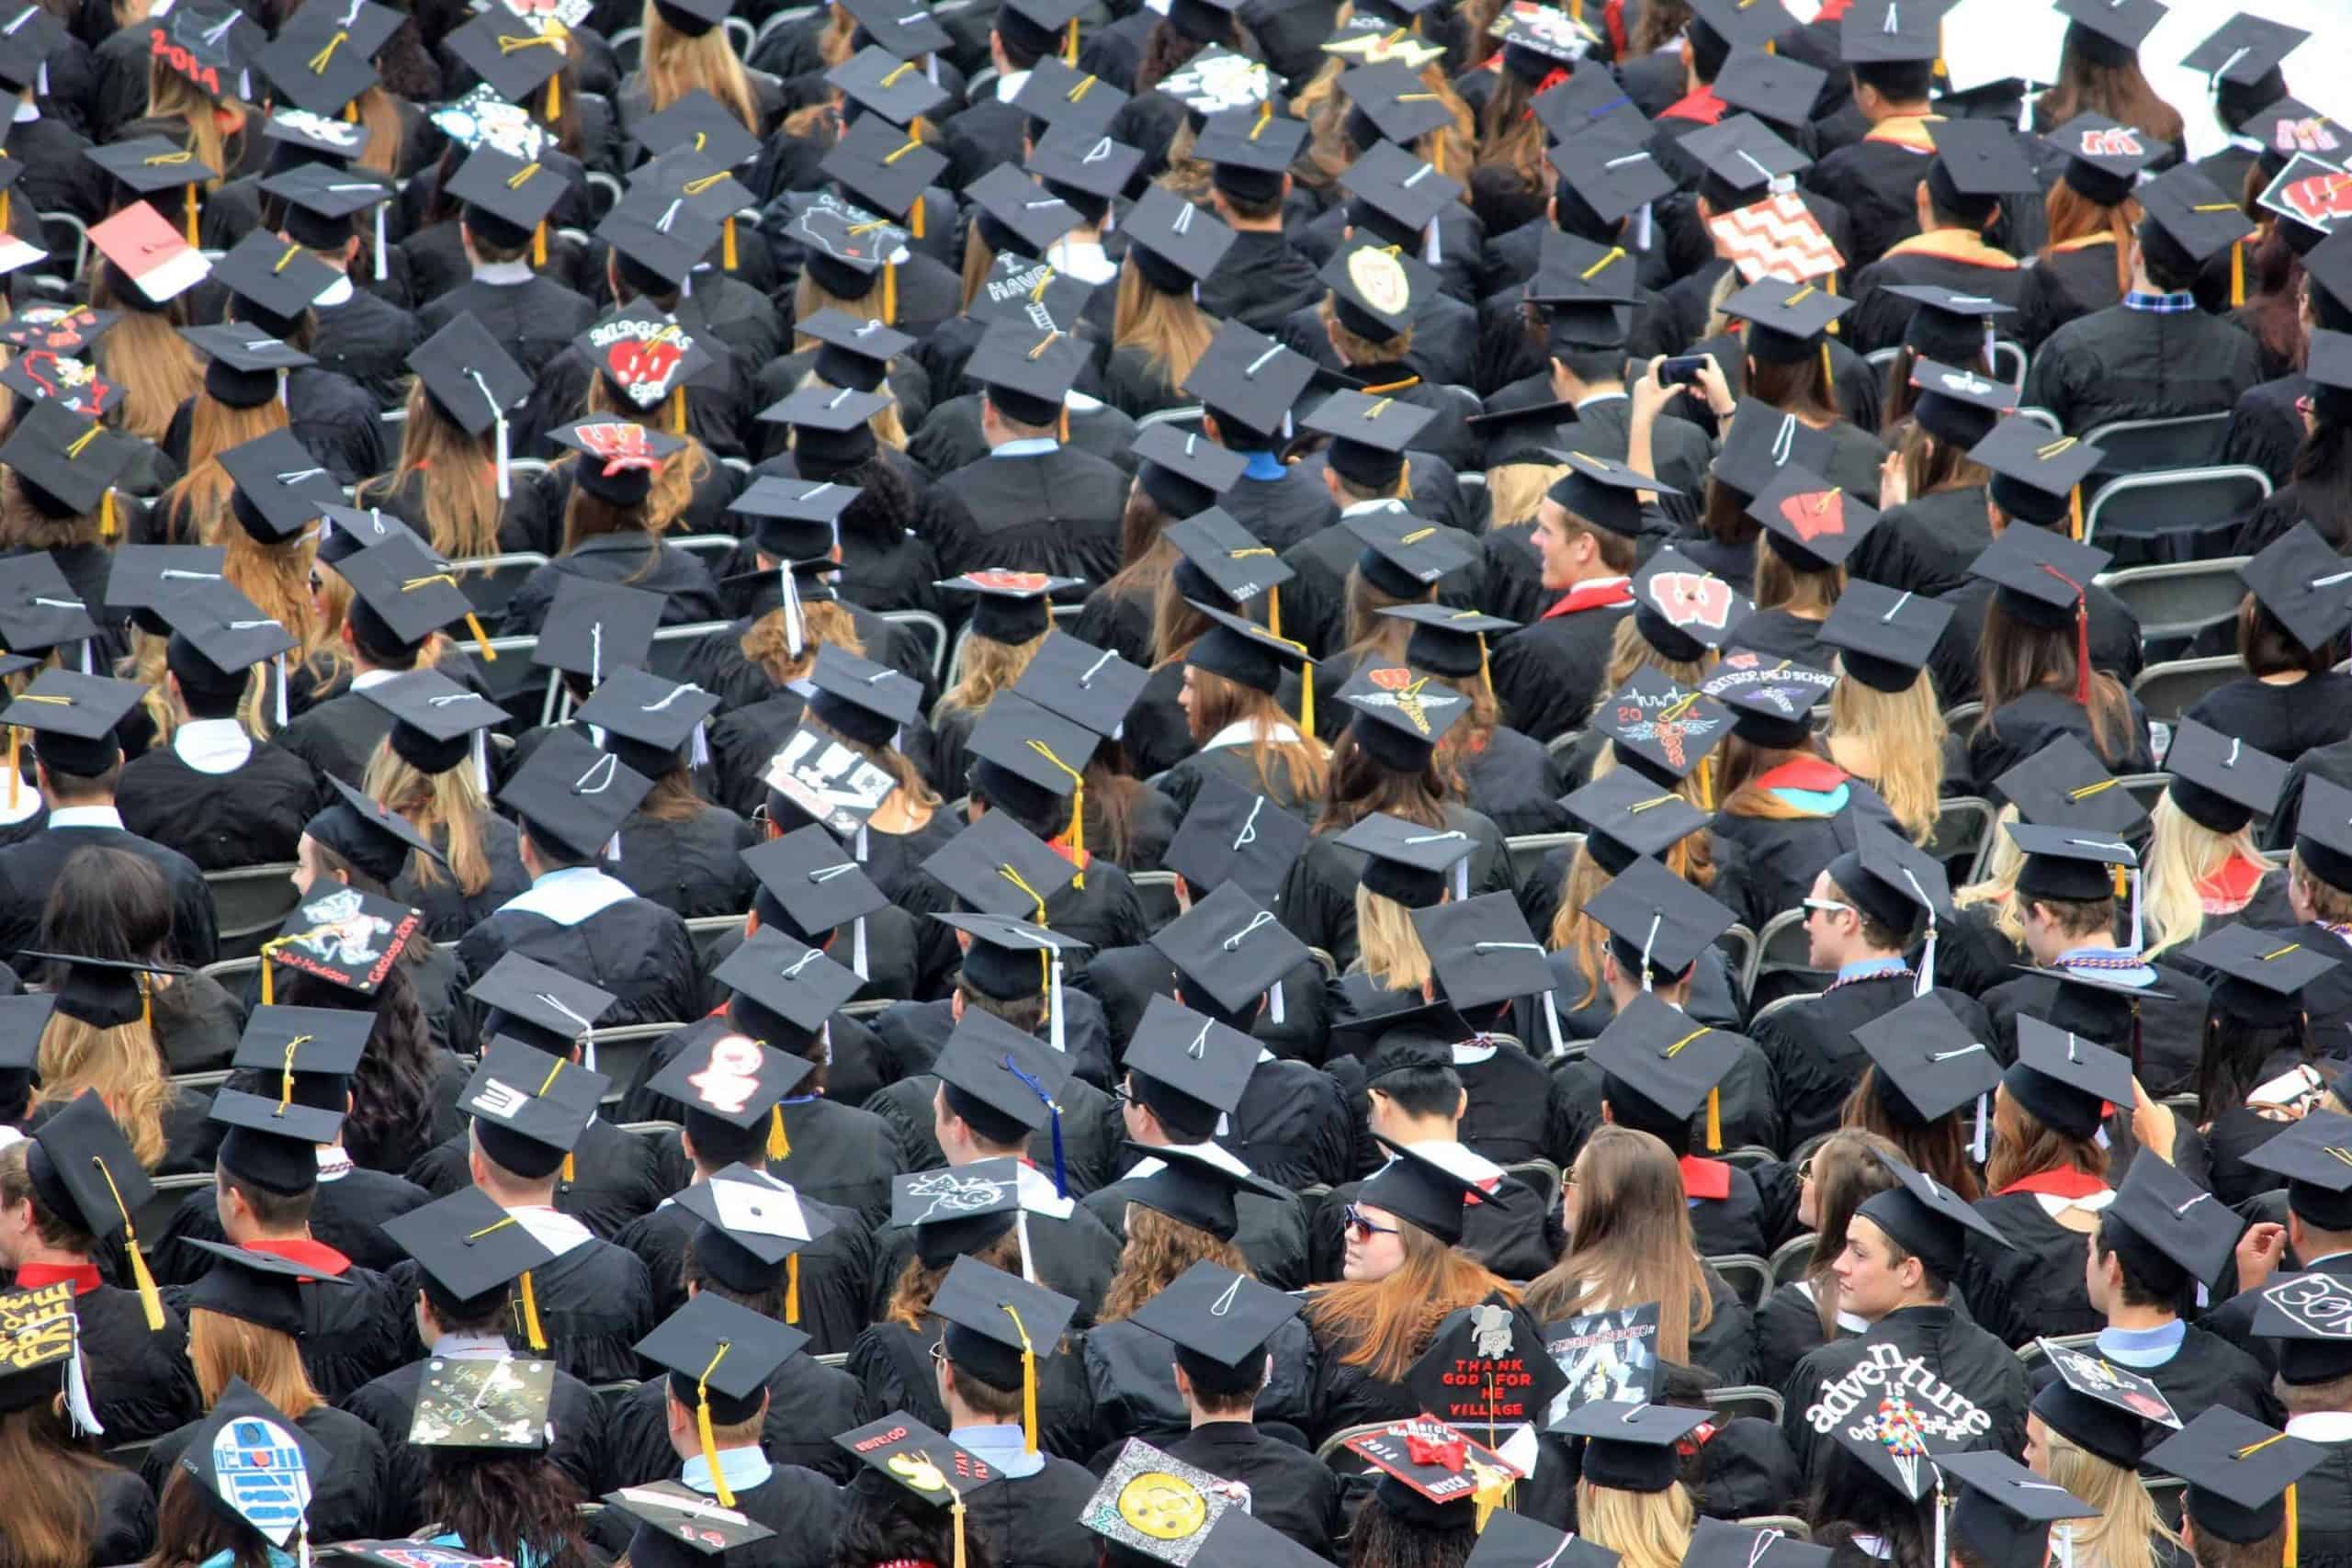 rows of graduates in their caps at a graduation ceremony